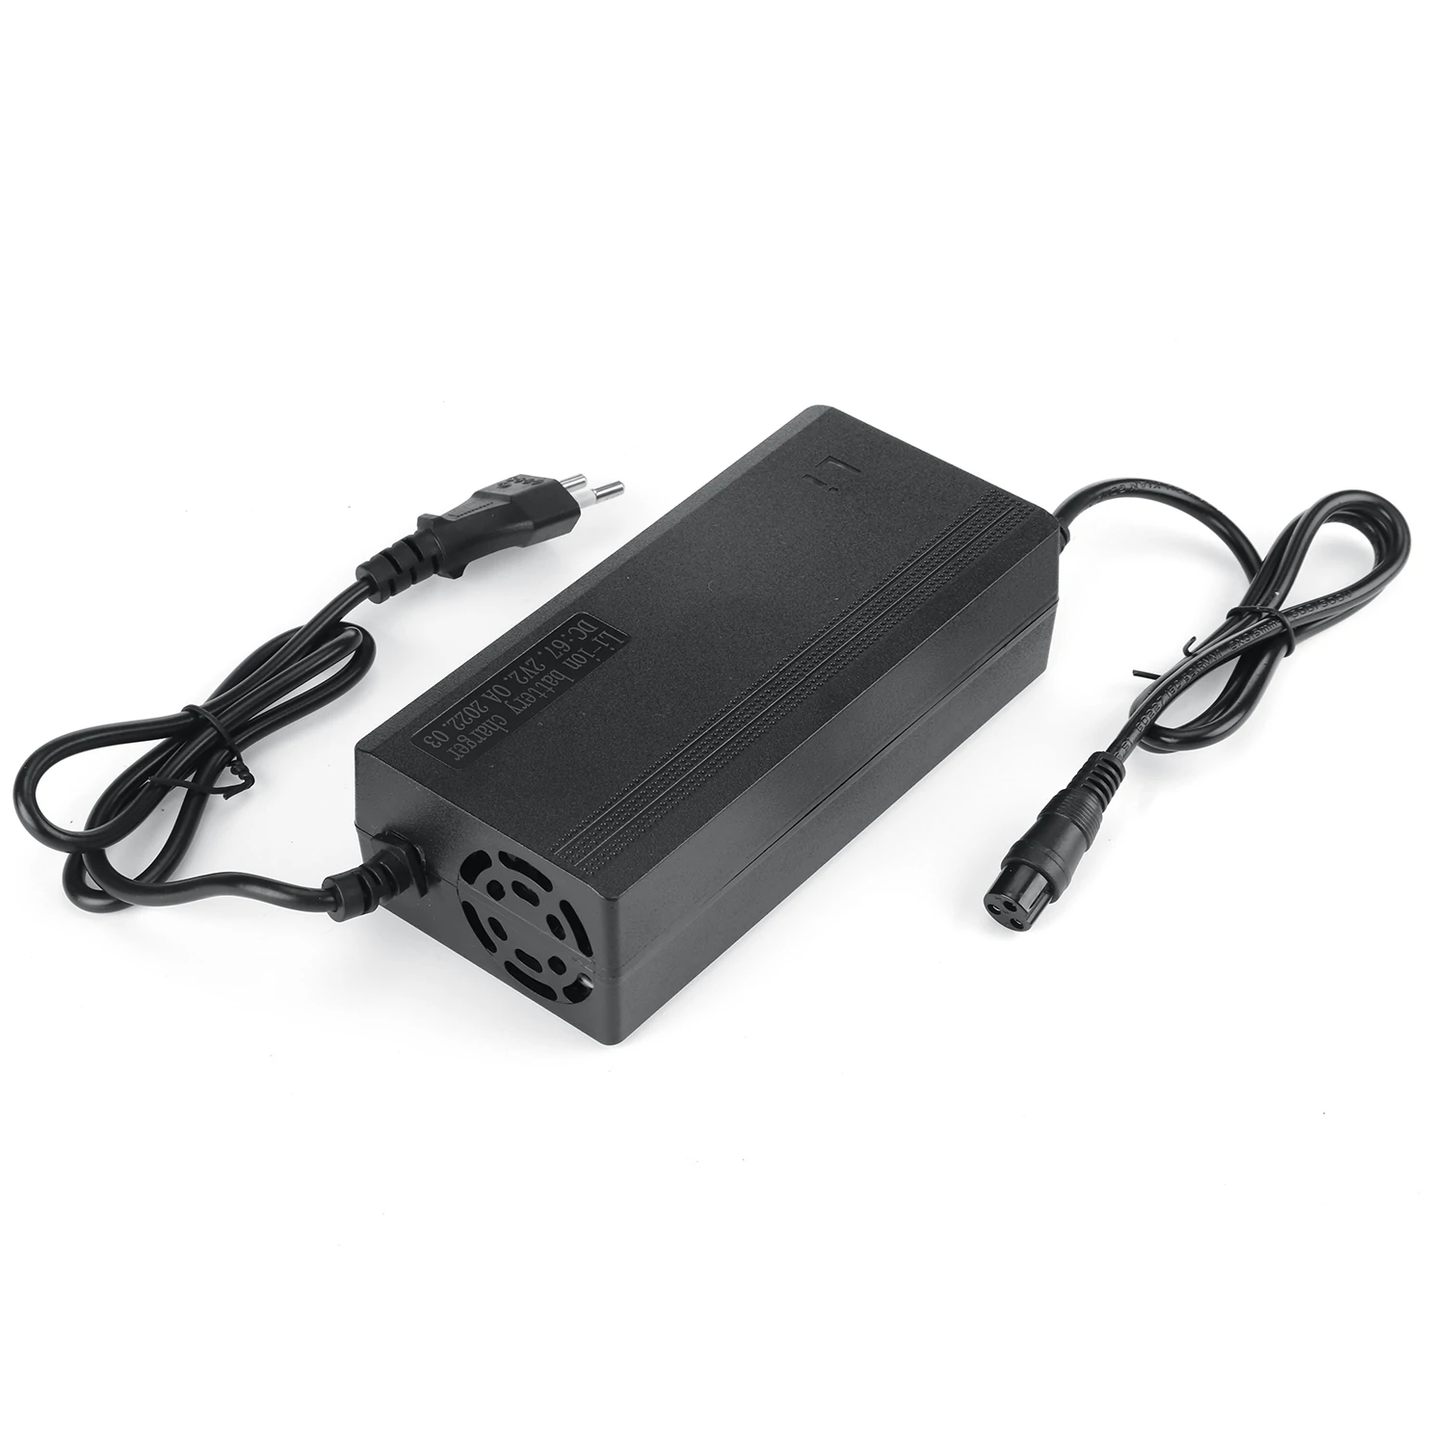 ZonDoo 60V / 52V Electric Scooter Charger